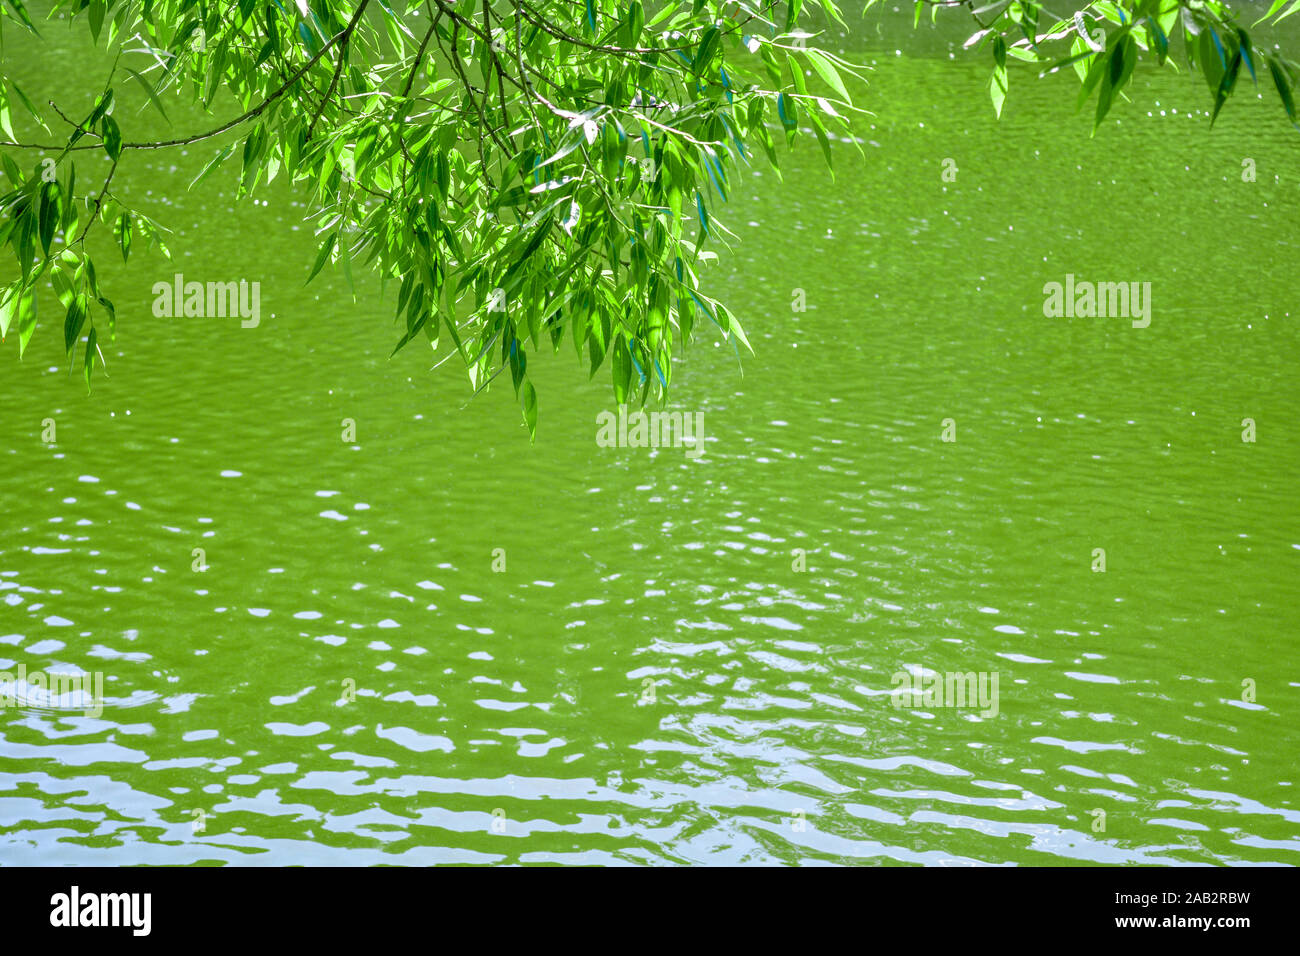 Weeping Willow Tree And Water High Resolution Stock Photography and ...